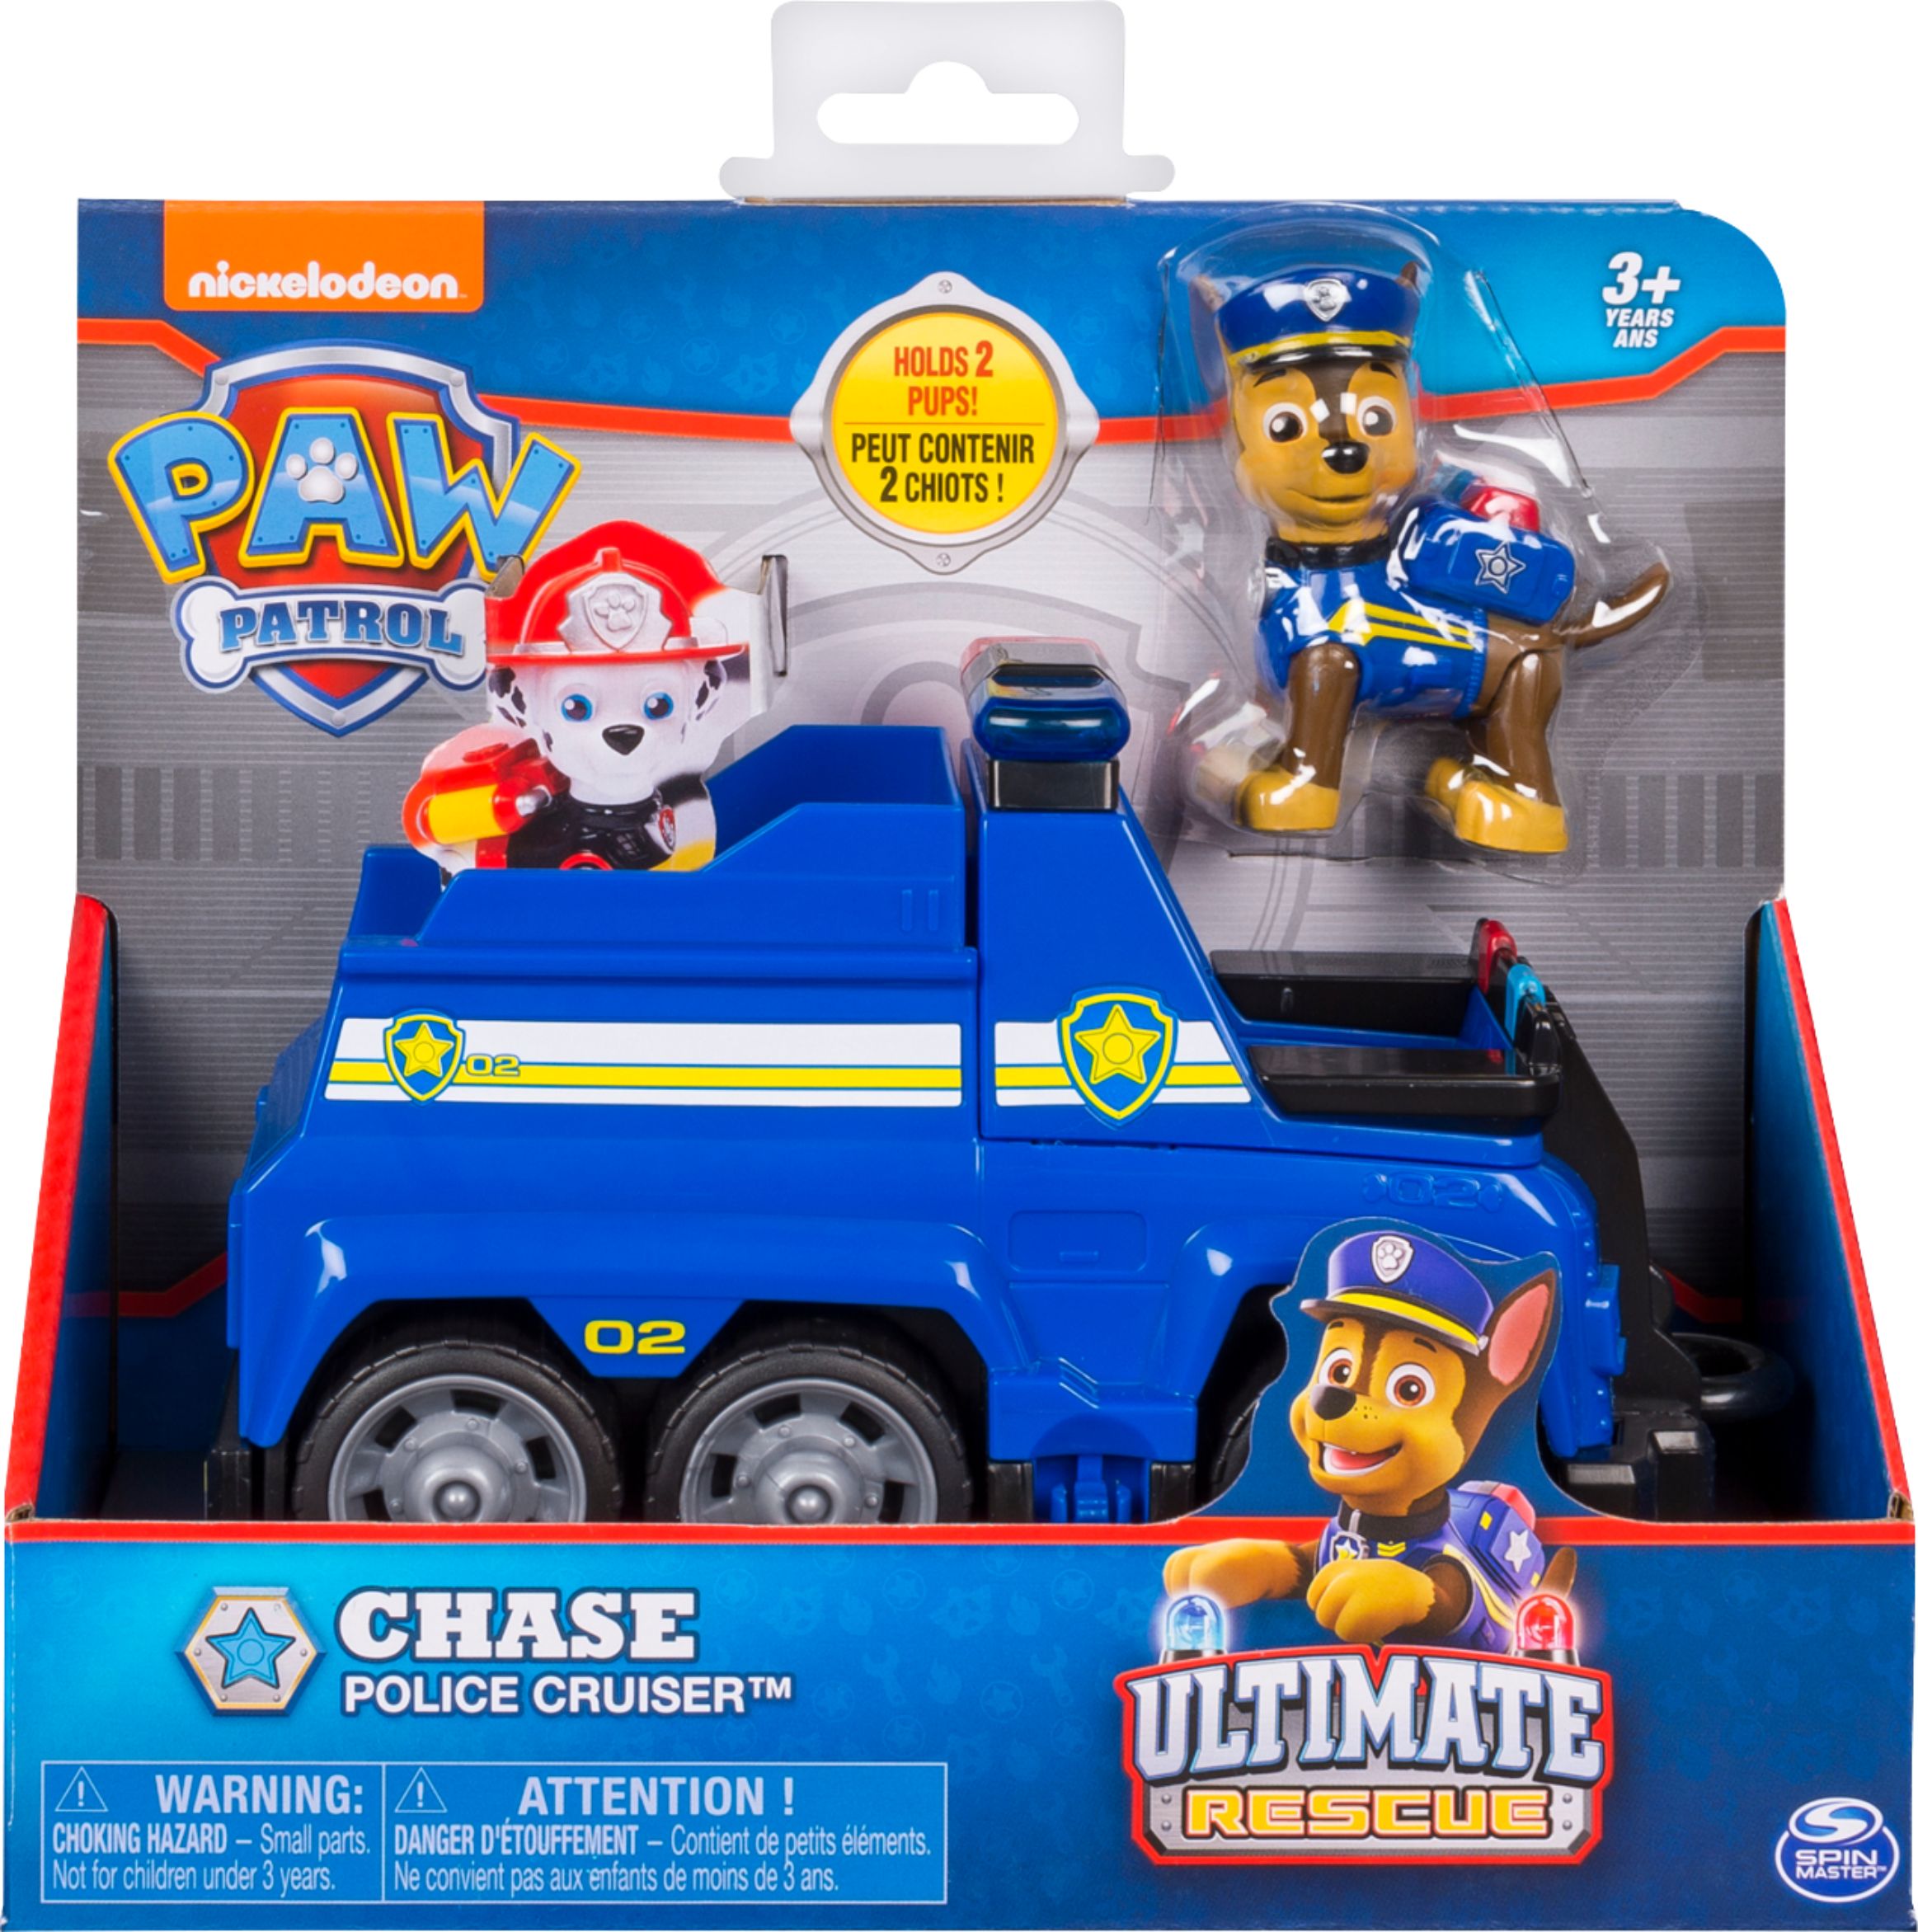 Paw Patrol Ultimate Rescue Toy Vehicle 